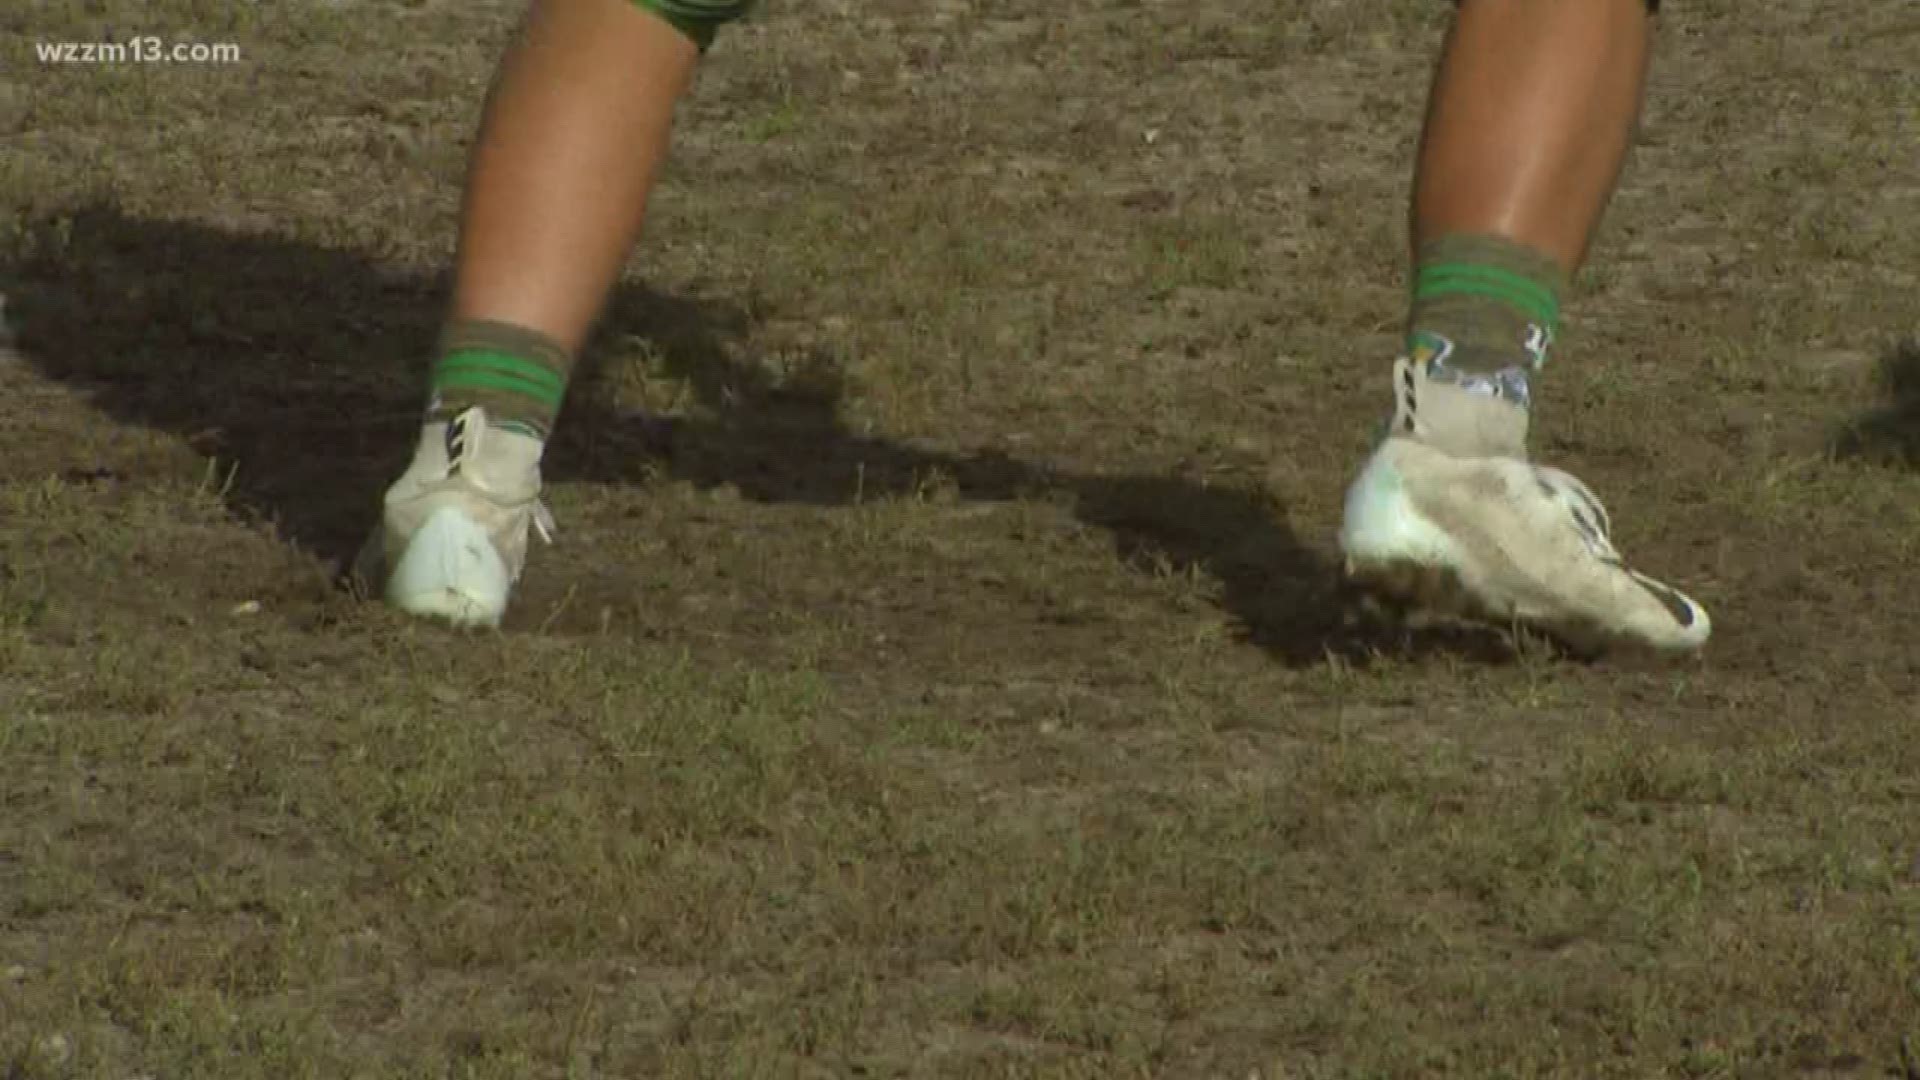 Hesperia player fights cancer and starts season